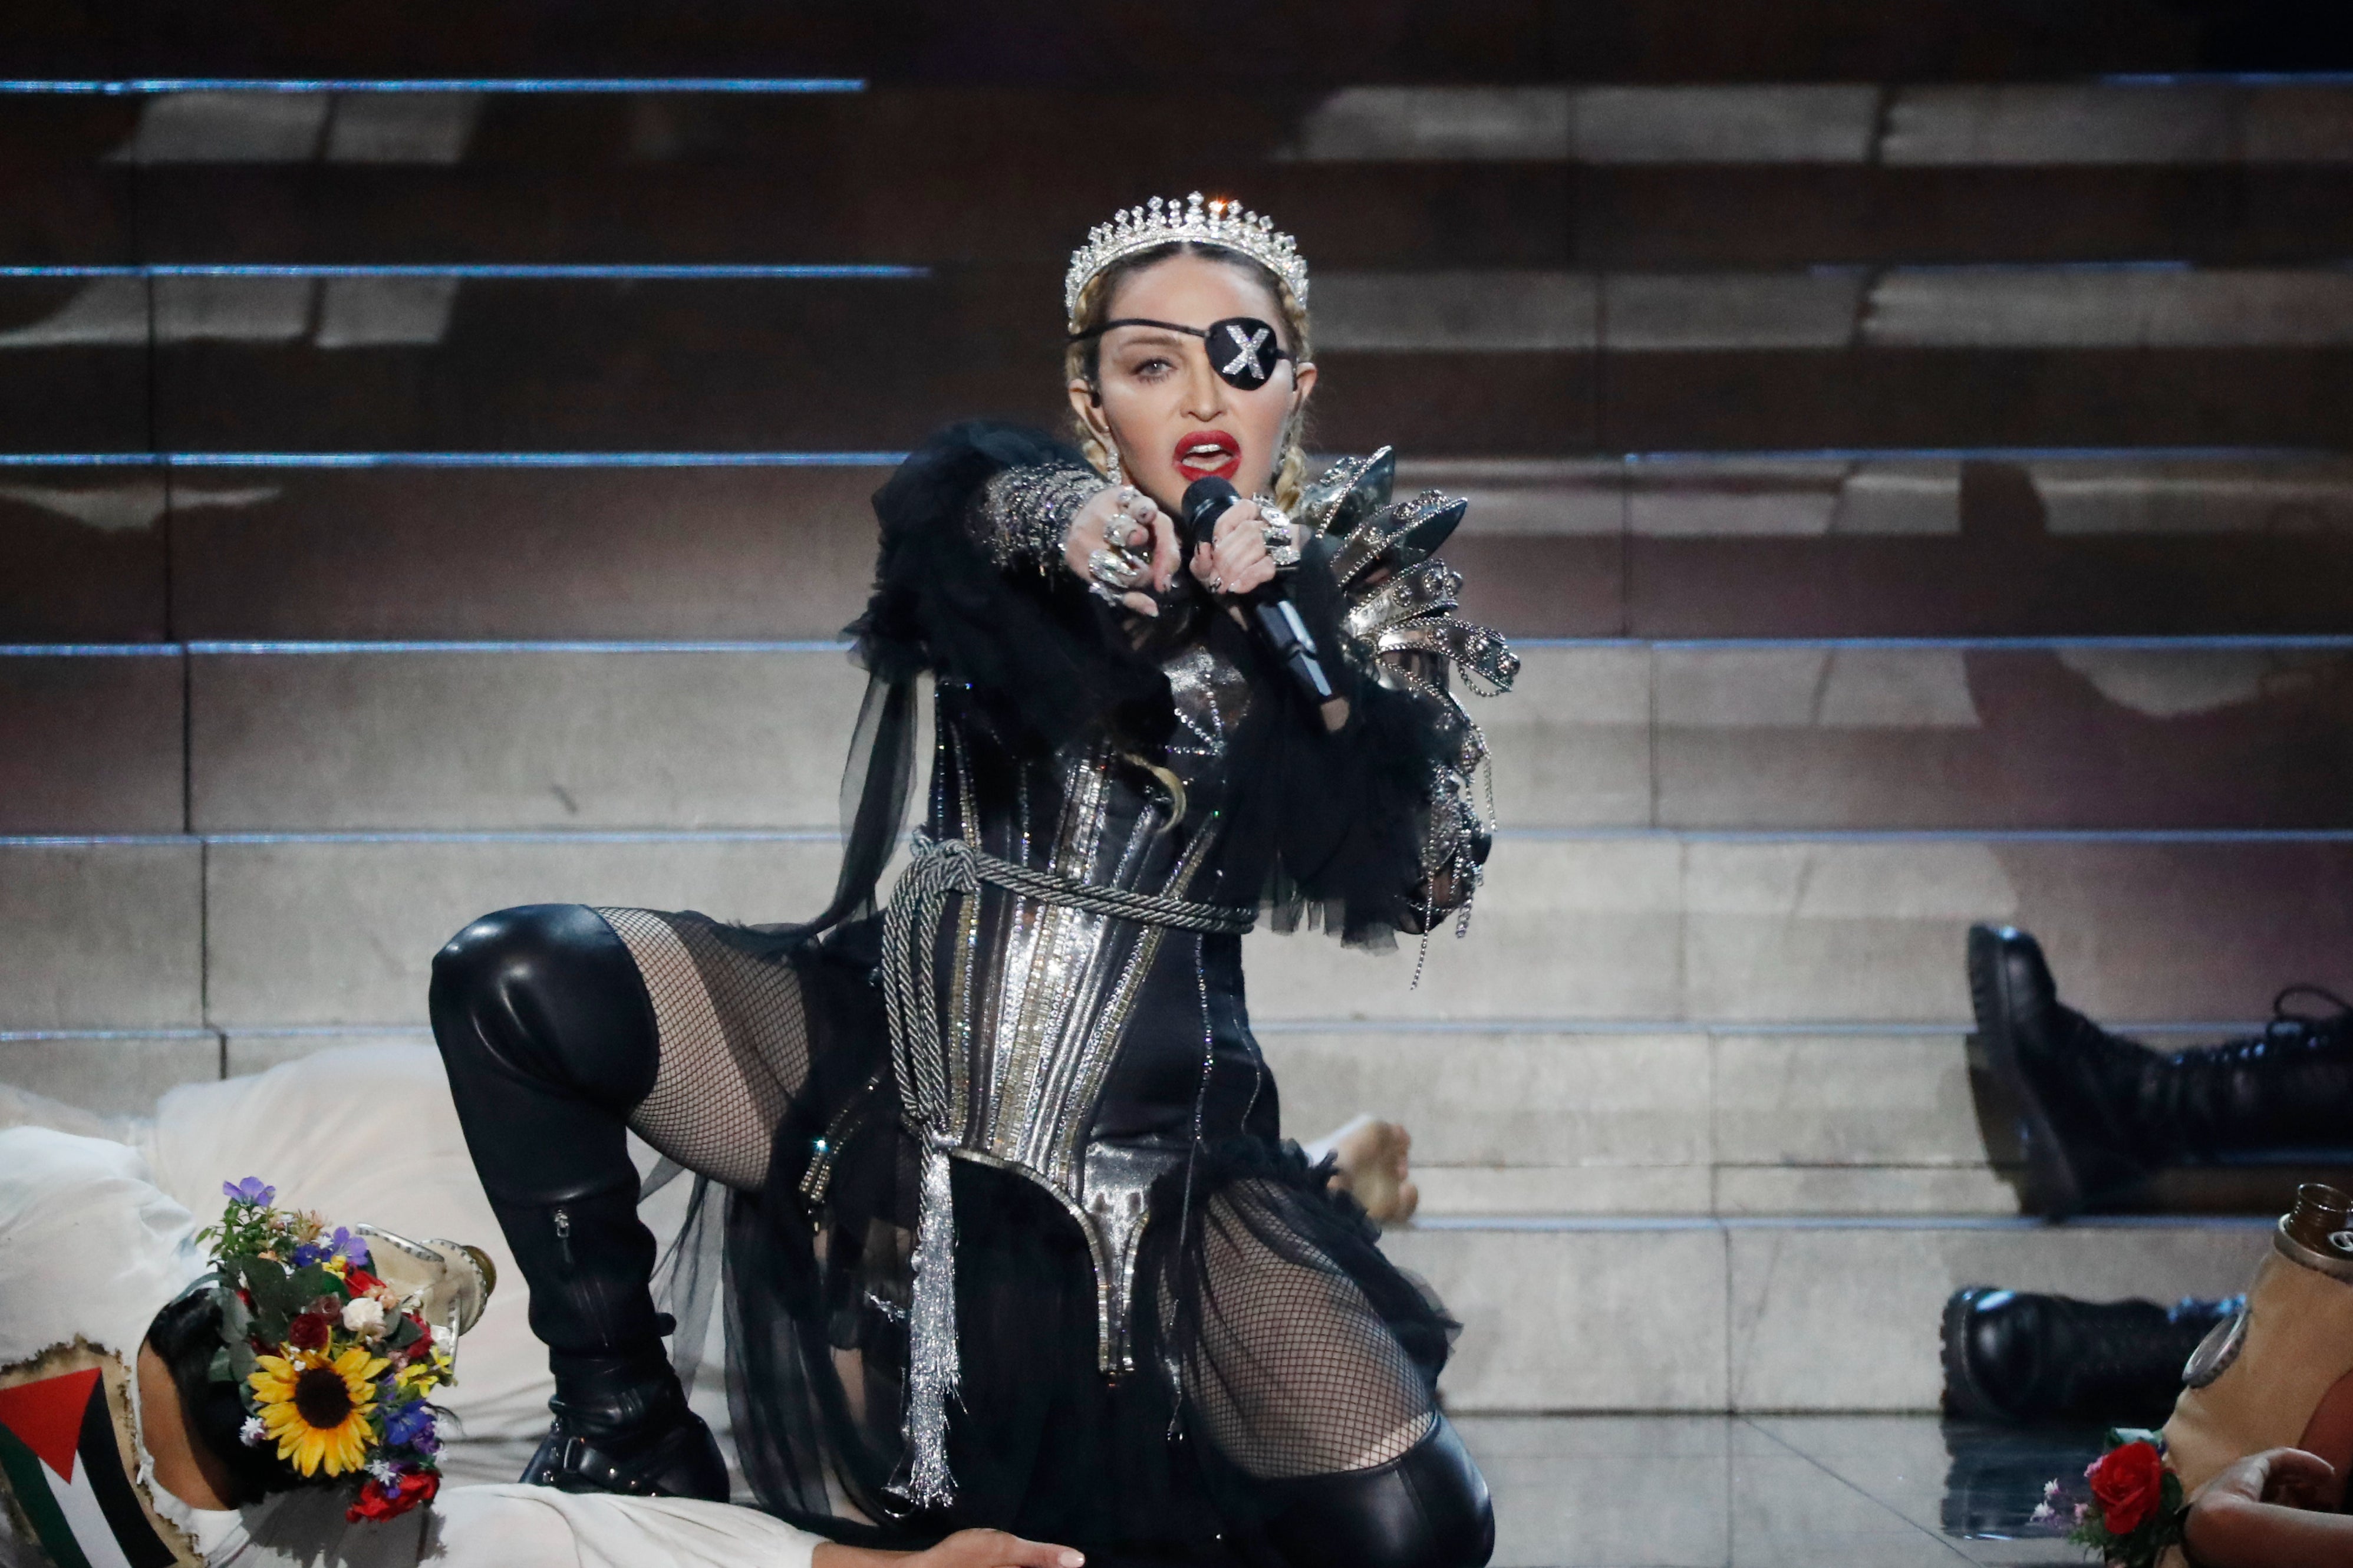 Madonna is being sued by fans over late concert arrival